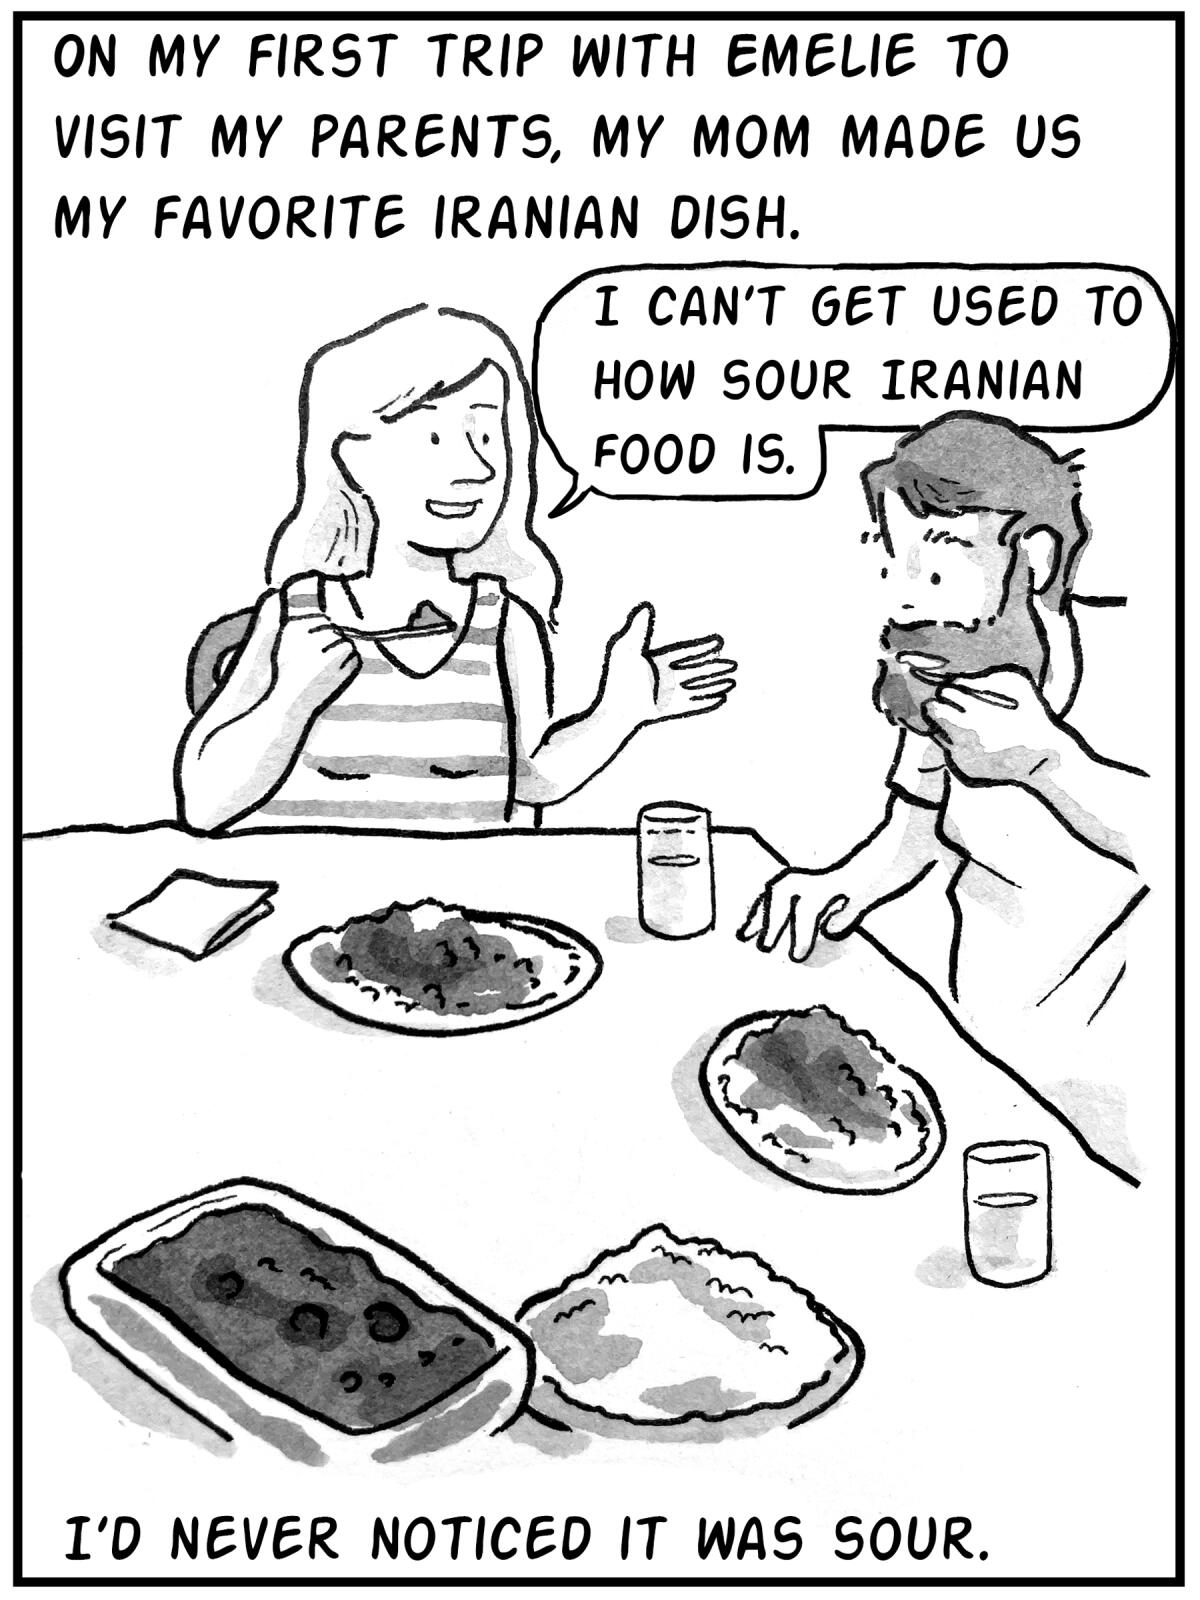 On my first trip with Emelie to visit my parents, my mom made us my favorite Iranian dish. I'd never noticed it was sour.